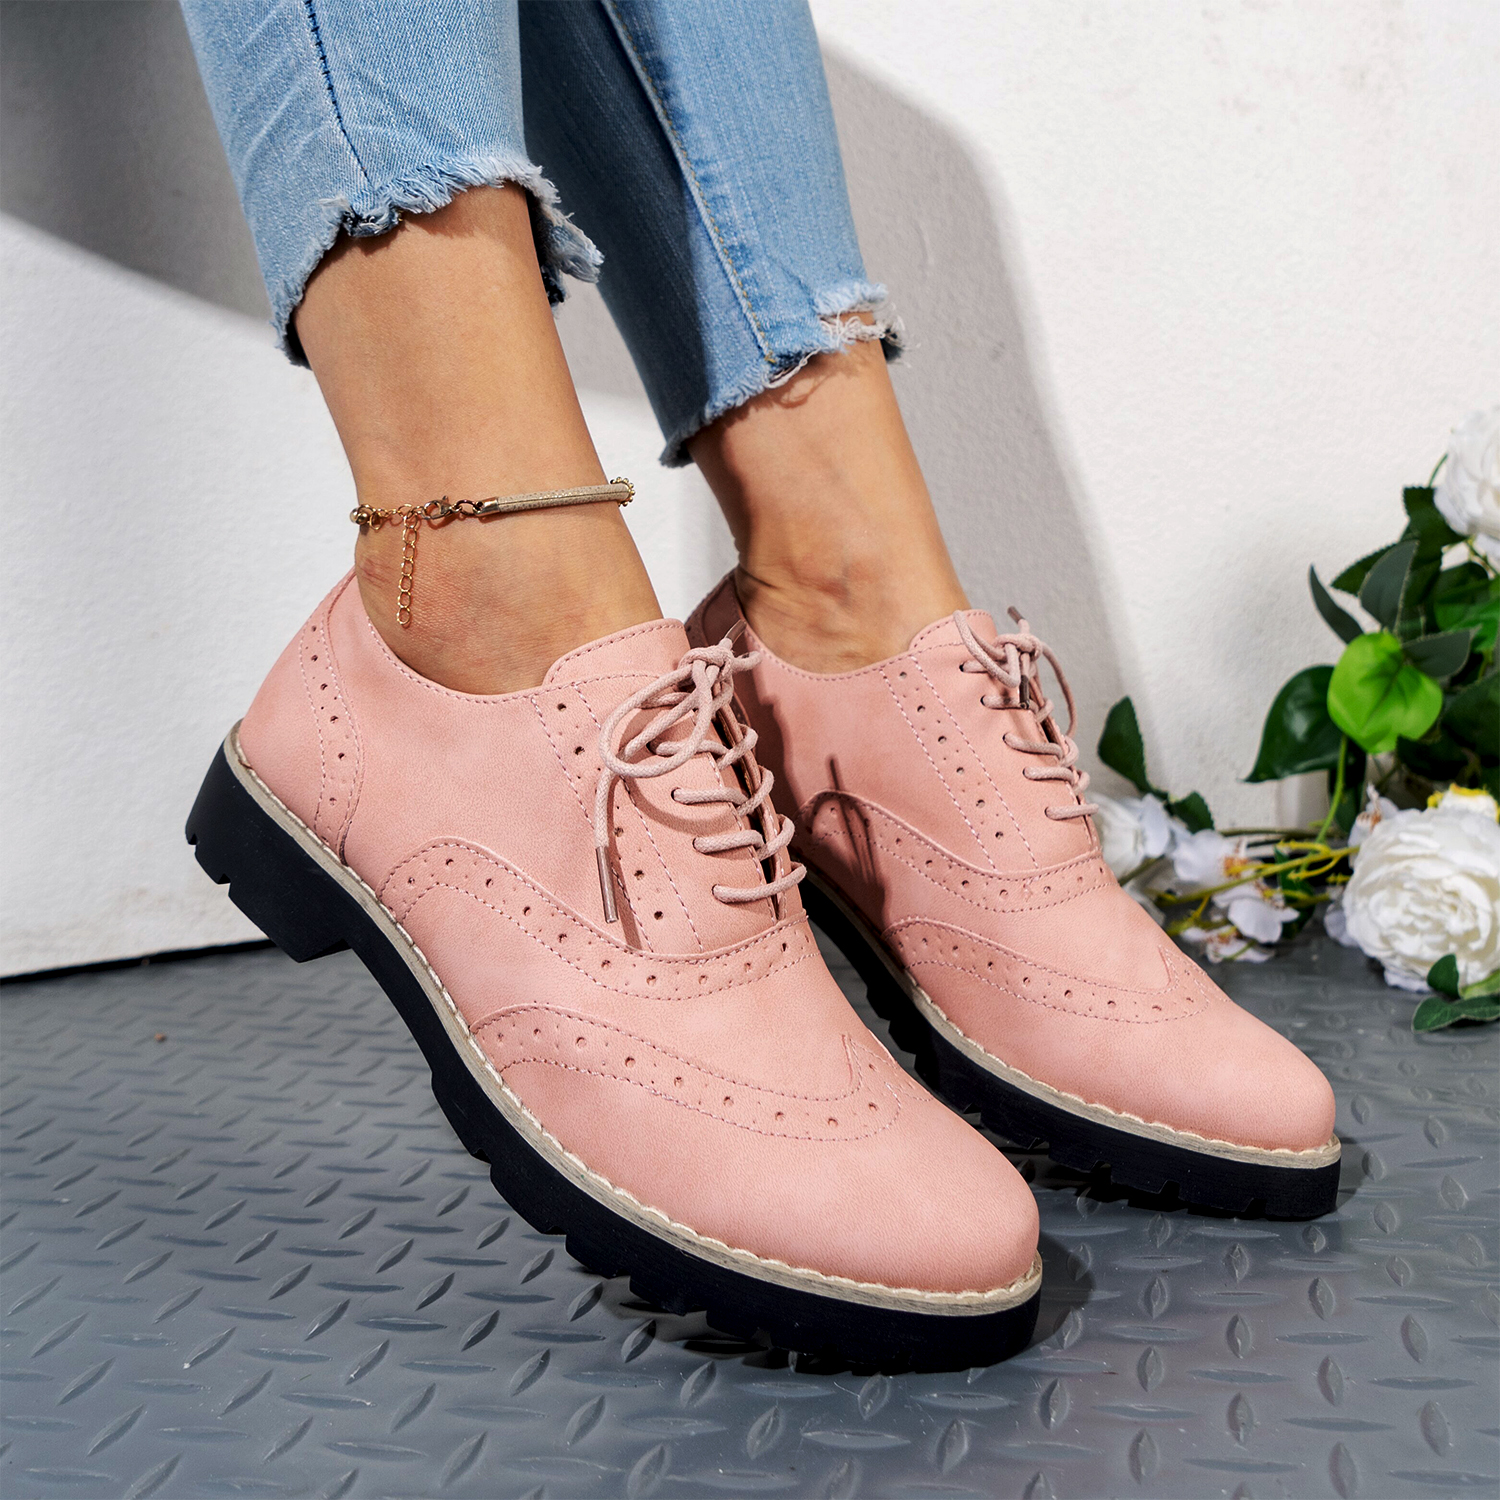 Women's Lace Up Brogues Oxfords